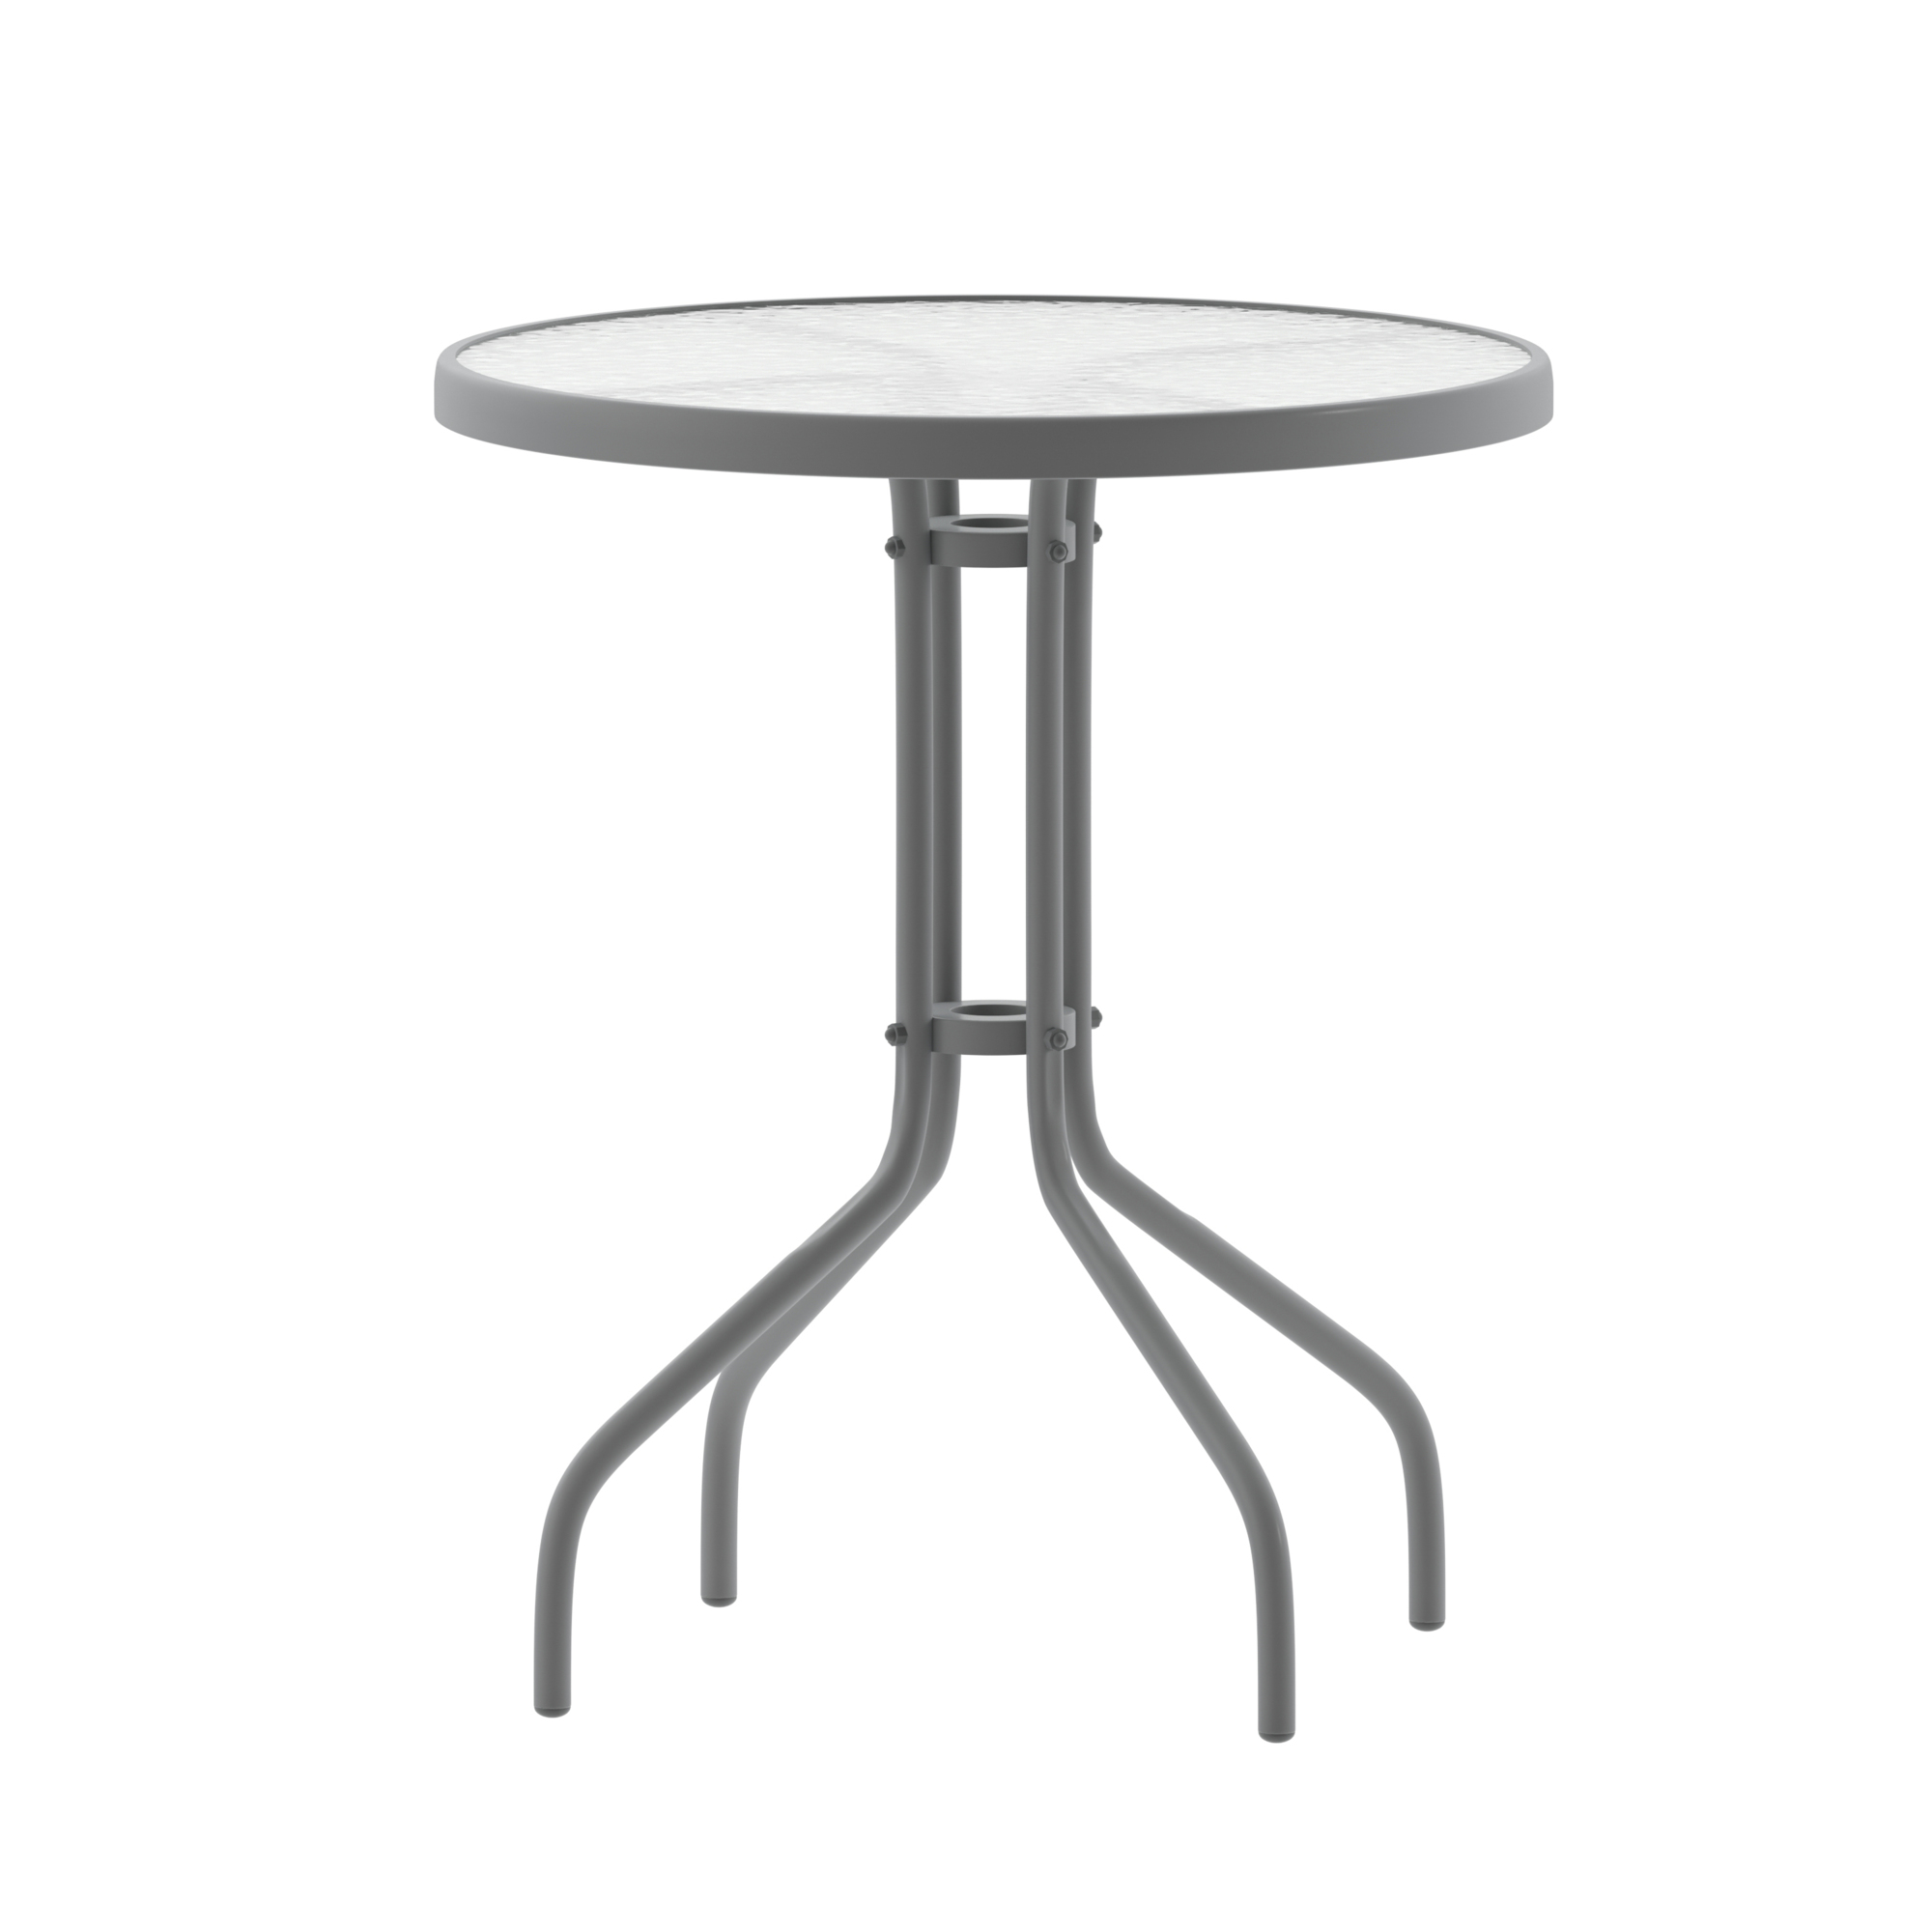 Flash Furniture, 23.75Inch Silver Round Tempered Glass Metal Table, Table Shape Round, Primary Color Gray, Height 28 in, Model TLH0701SV